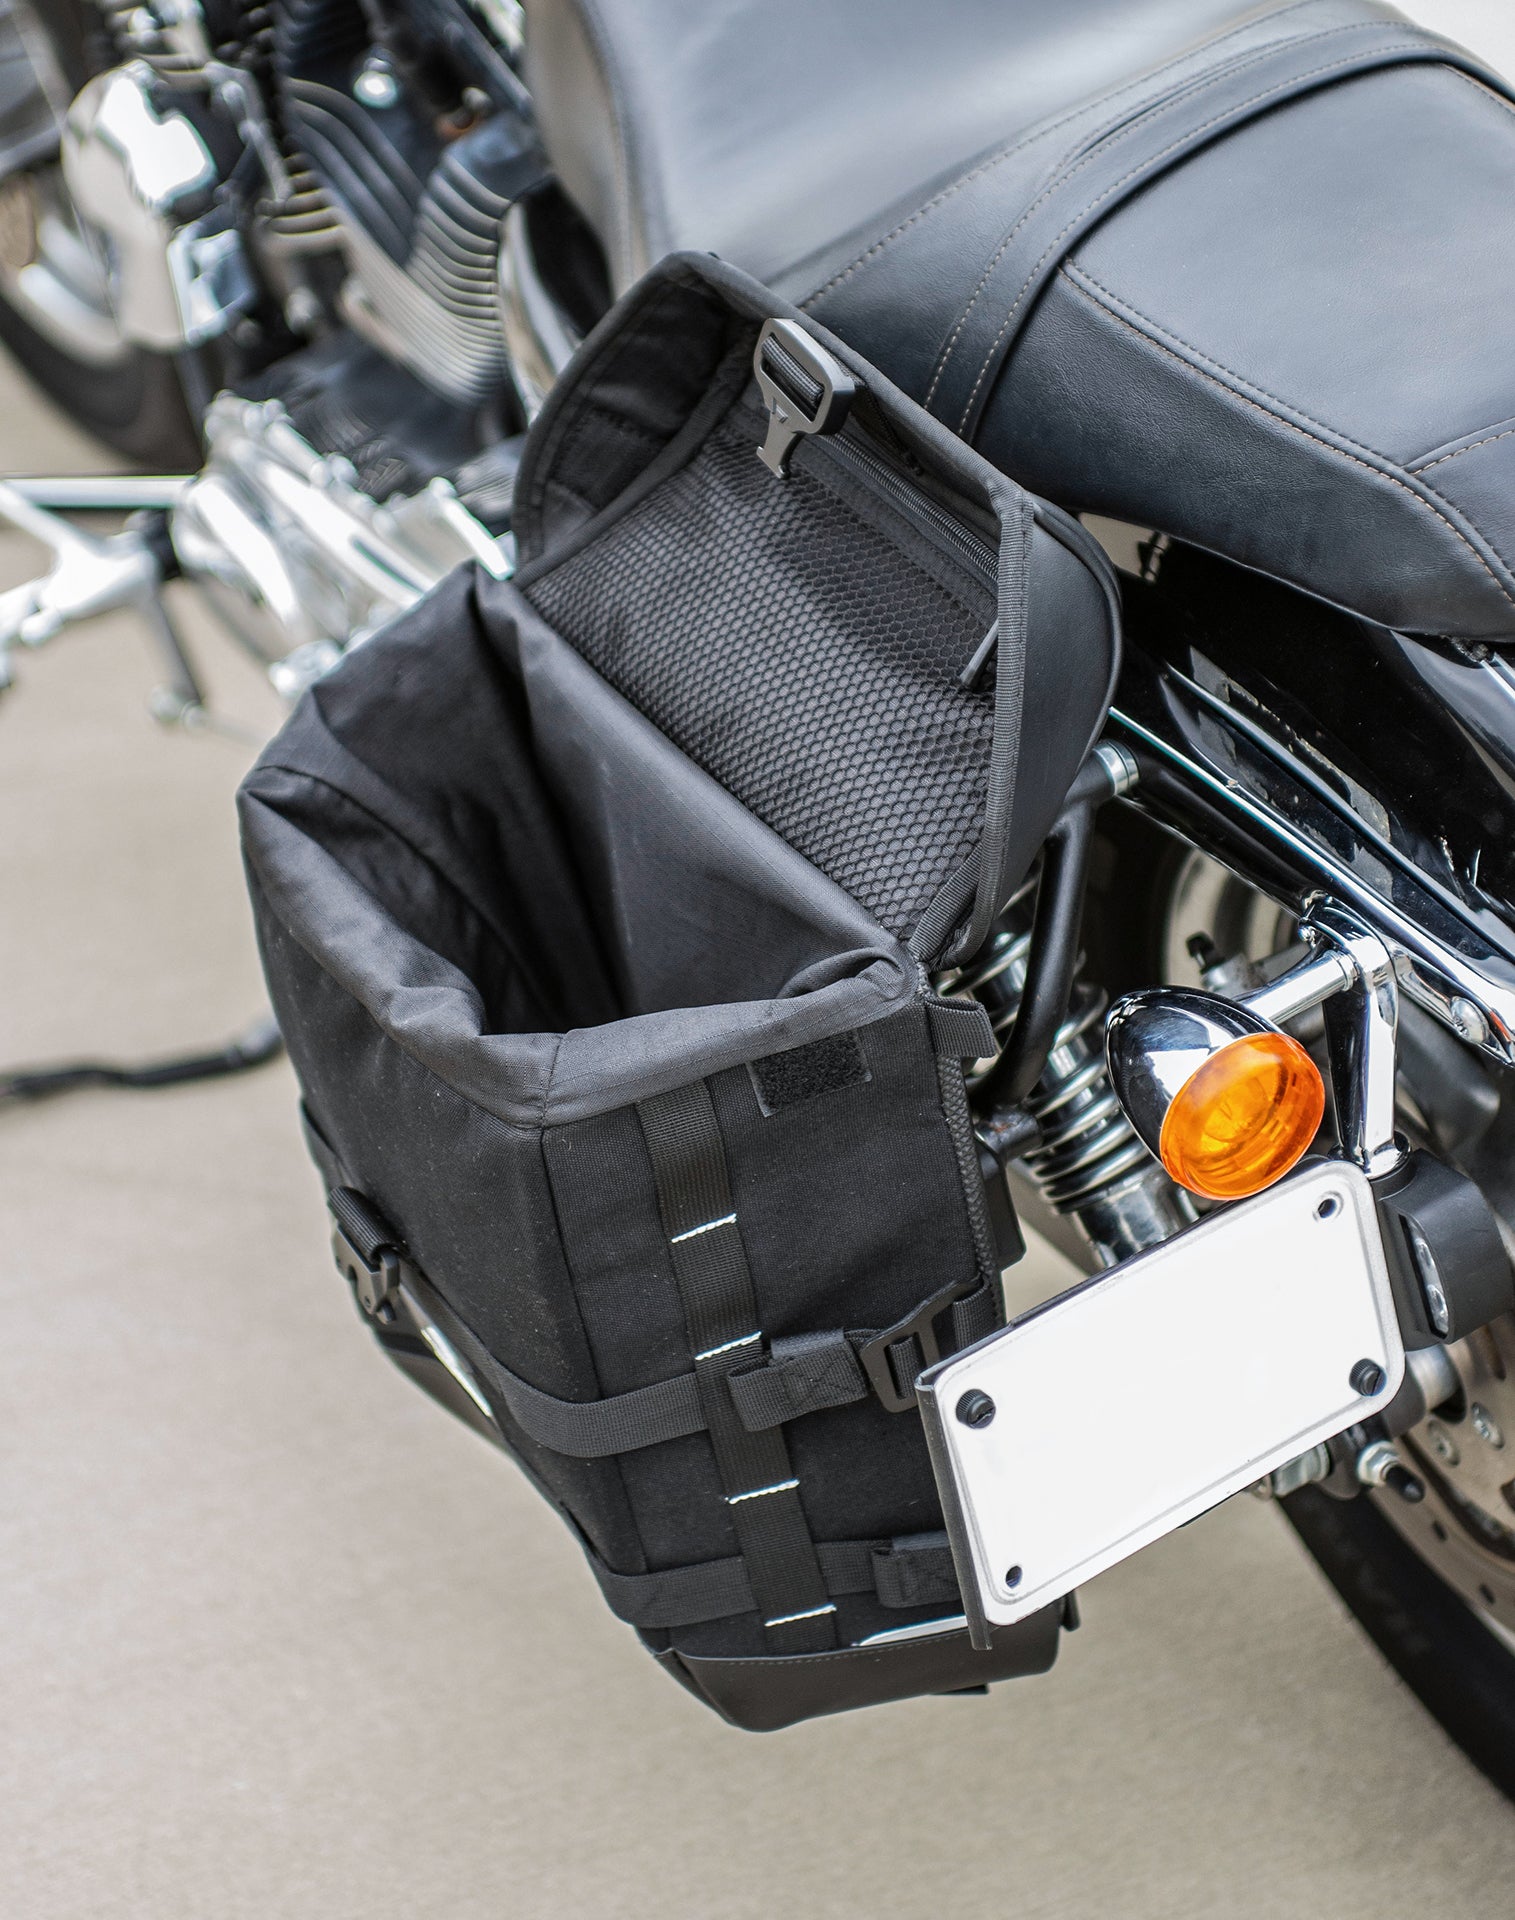 15L - Incognito Quick Mount Medium Solo Motorcycle Saddlebag (Left Only) for Harley Sportster 1200 Custom XL1200C/XLH1200C/XL50